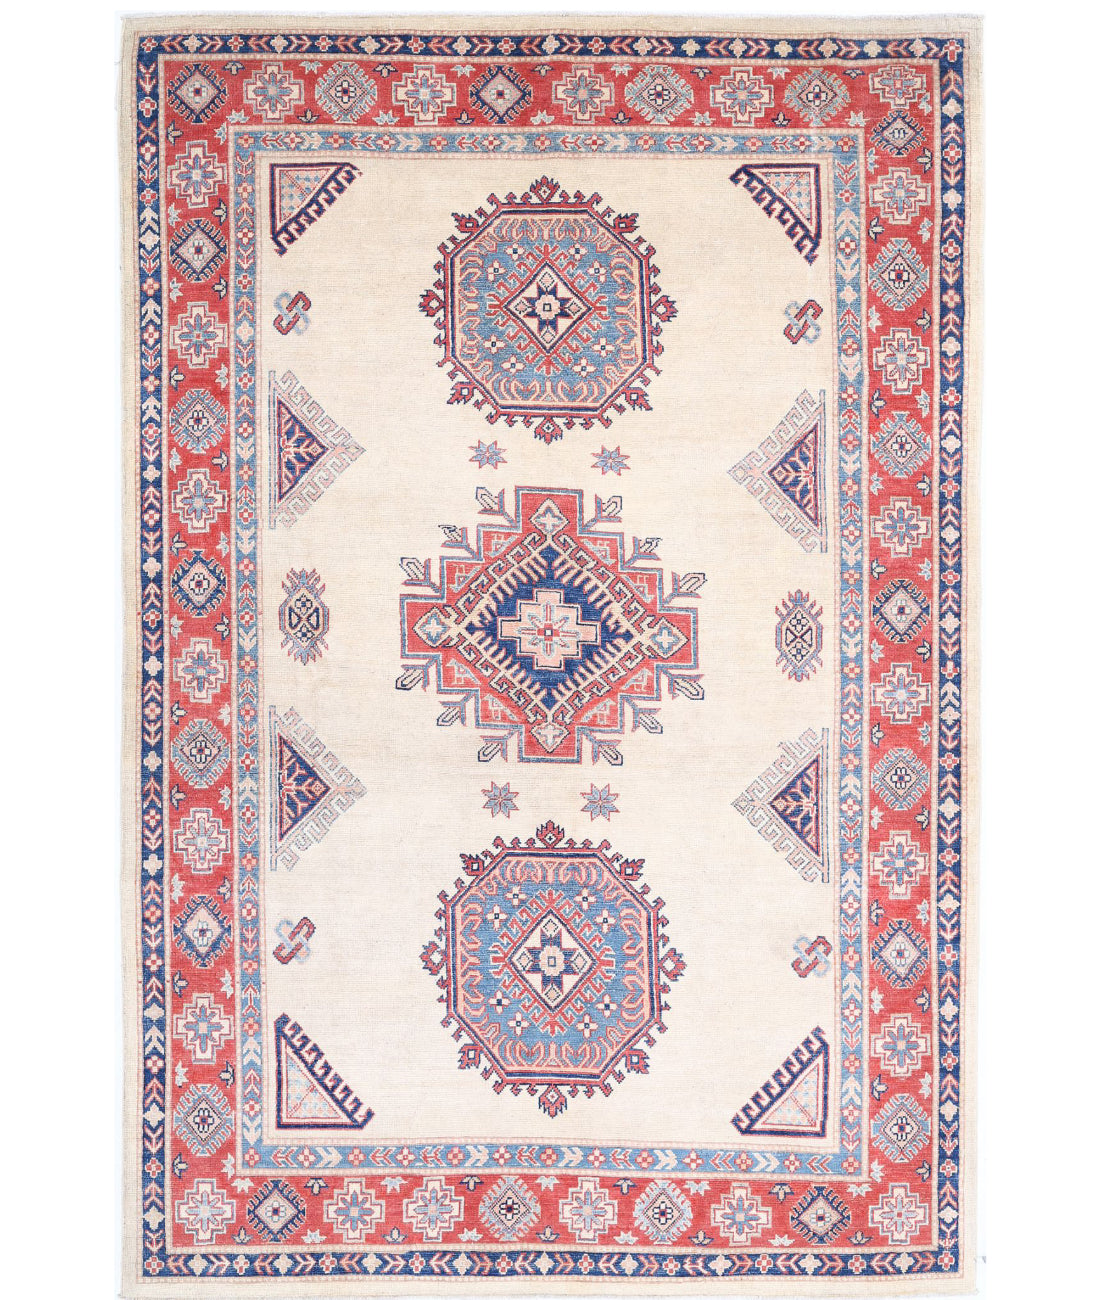 Hand Knotted Tribal Kazak Wool Rug - 6'2'' x 9'2'' 6'2'' x 9'2'' (185 X 275) / Ivory / Red